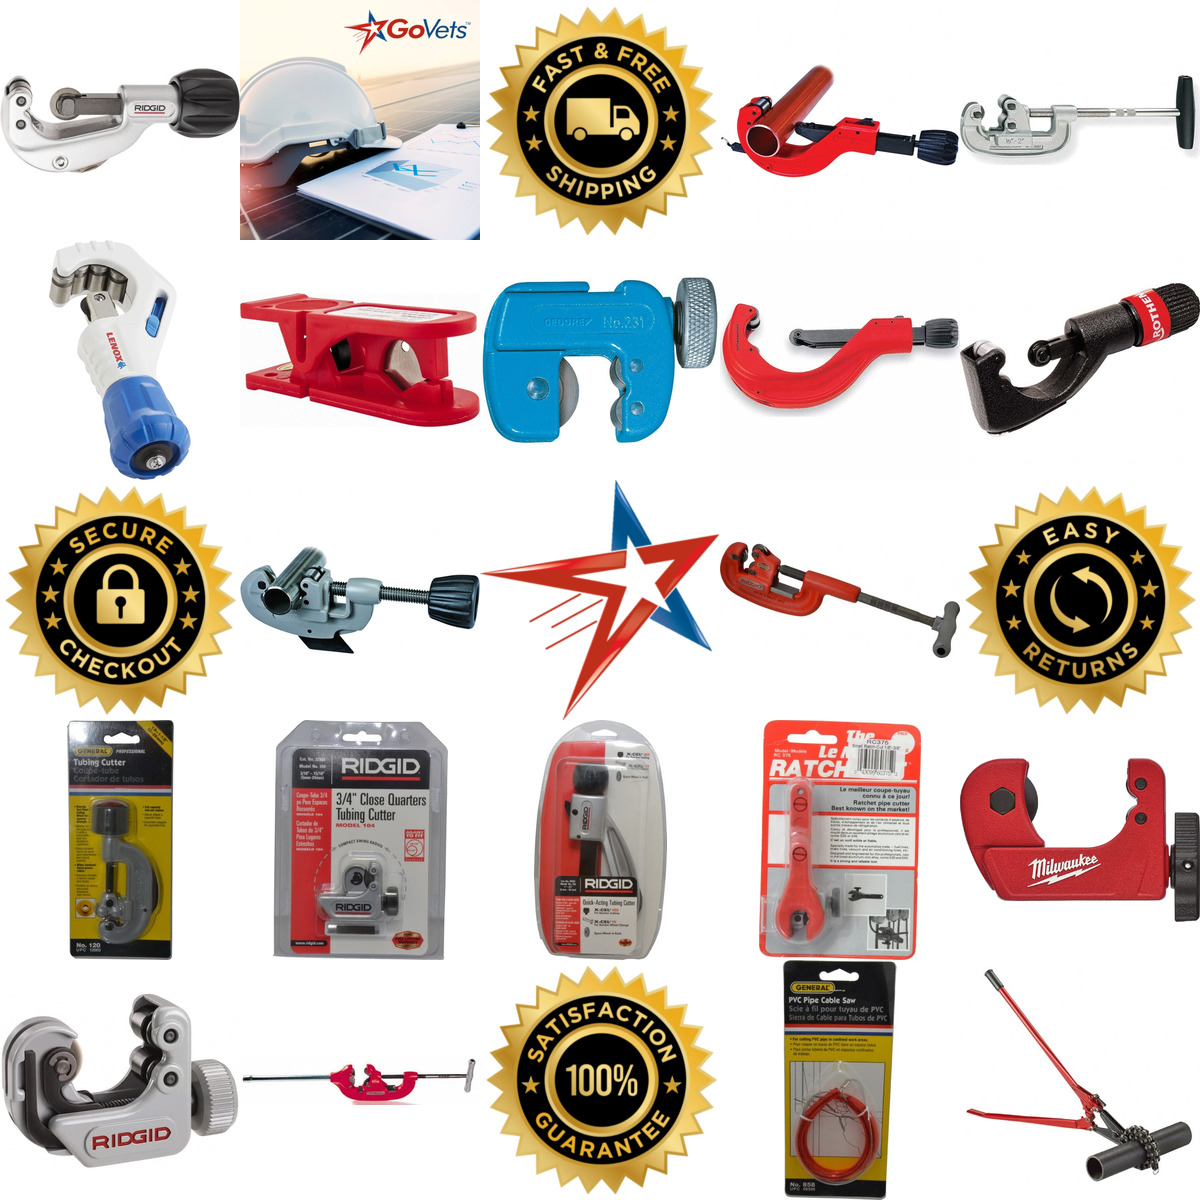 A selection of Pipe and Tube Cutters products on GoVets